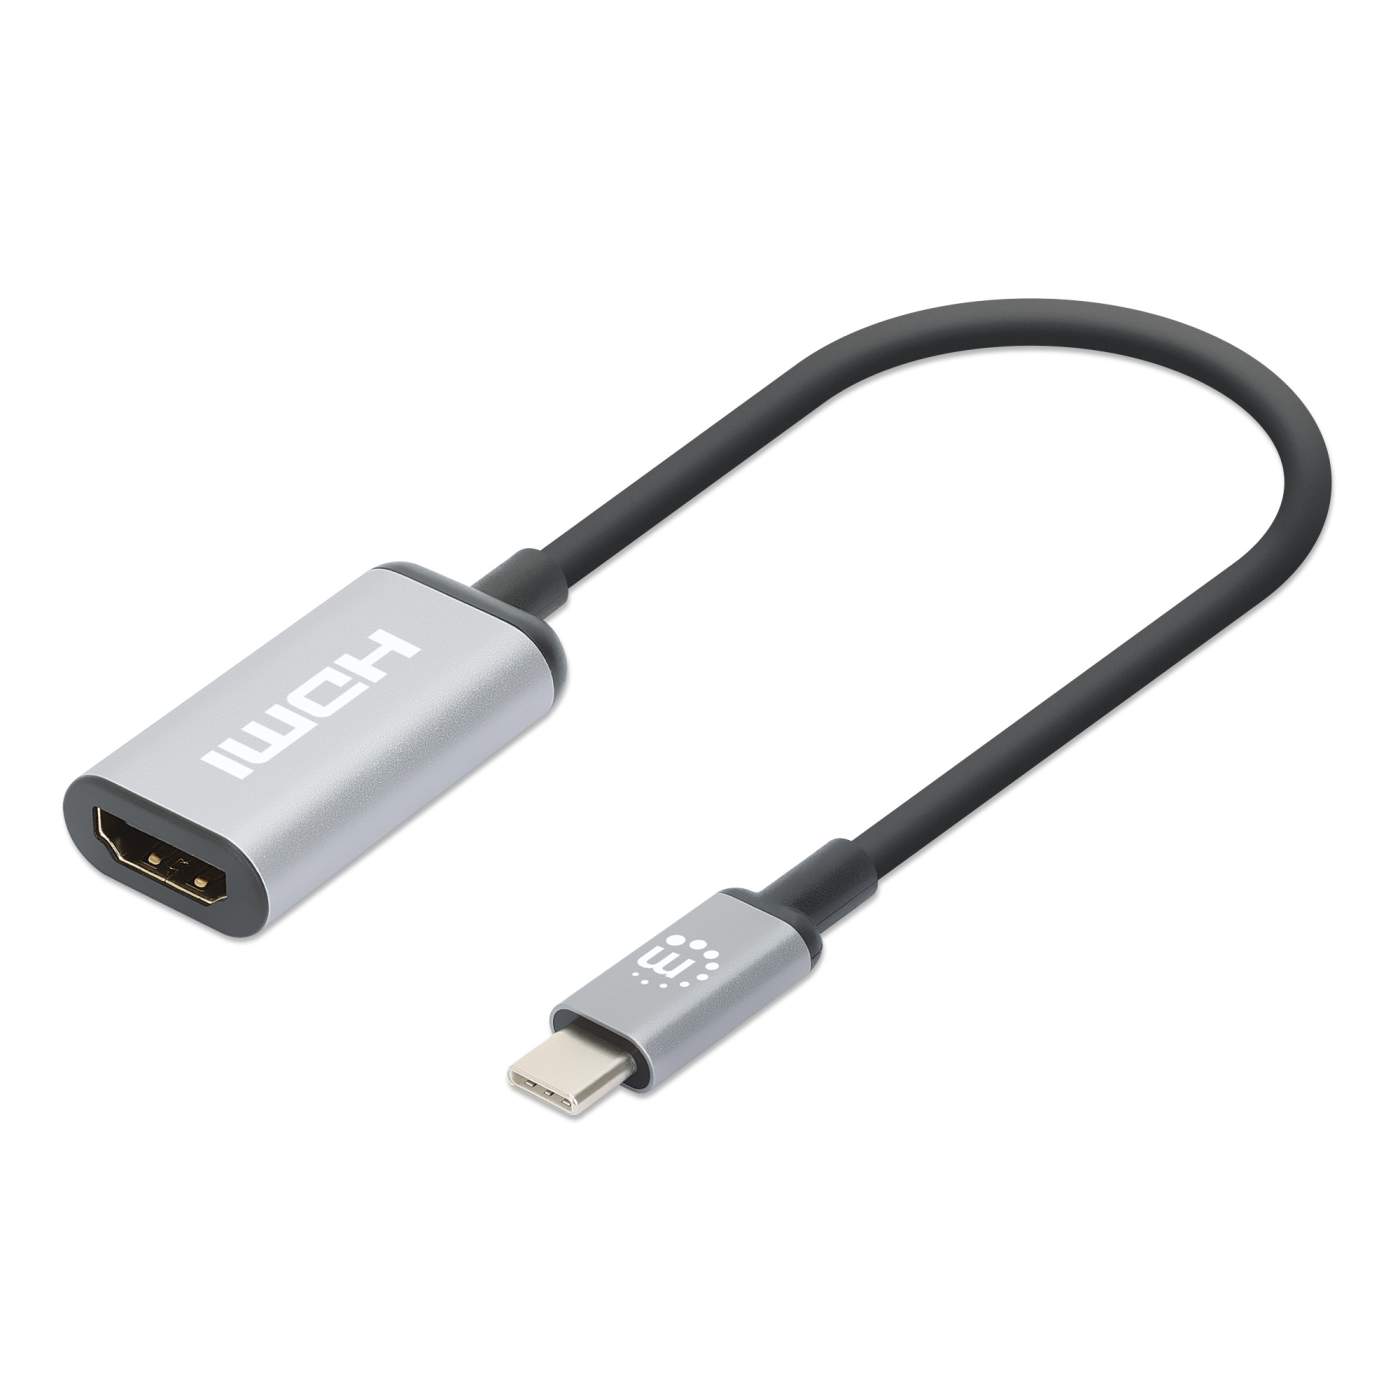 USB-C to HMDI 4K cable